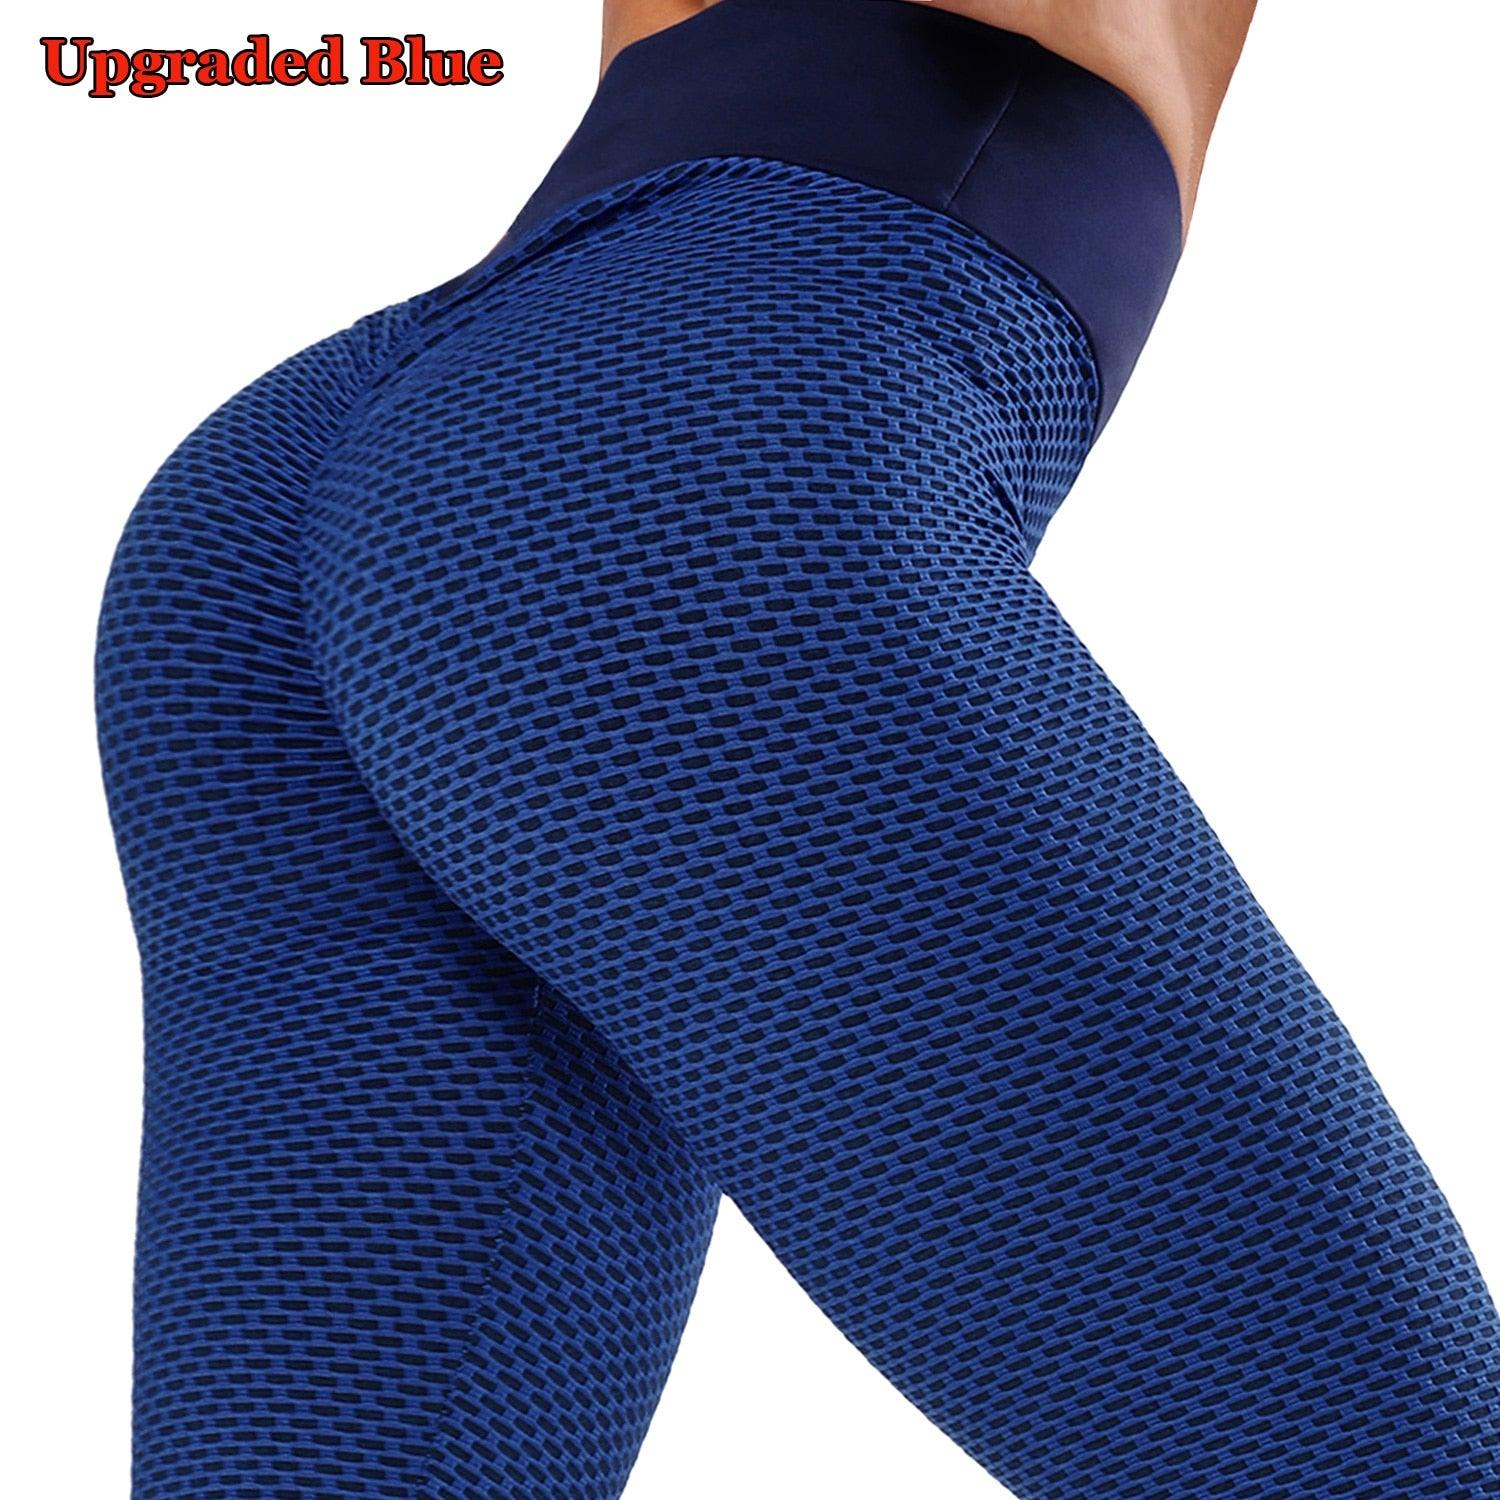 FITTOO Booty Lift Leggings for Women Workout Scrunch Butt Lifting Yoga  Pants Tummy Conrtol High Waited Tights Peach Butt Black XS at   Women's Clothing store